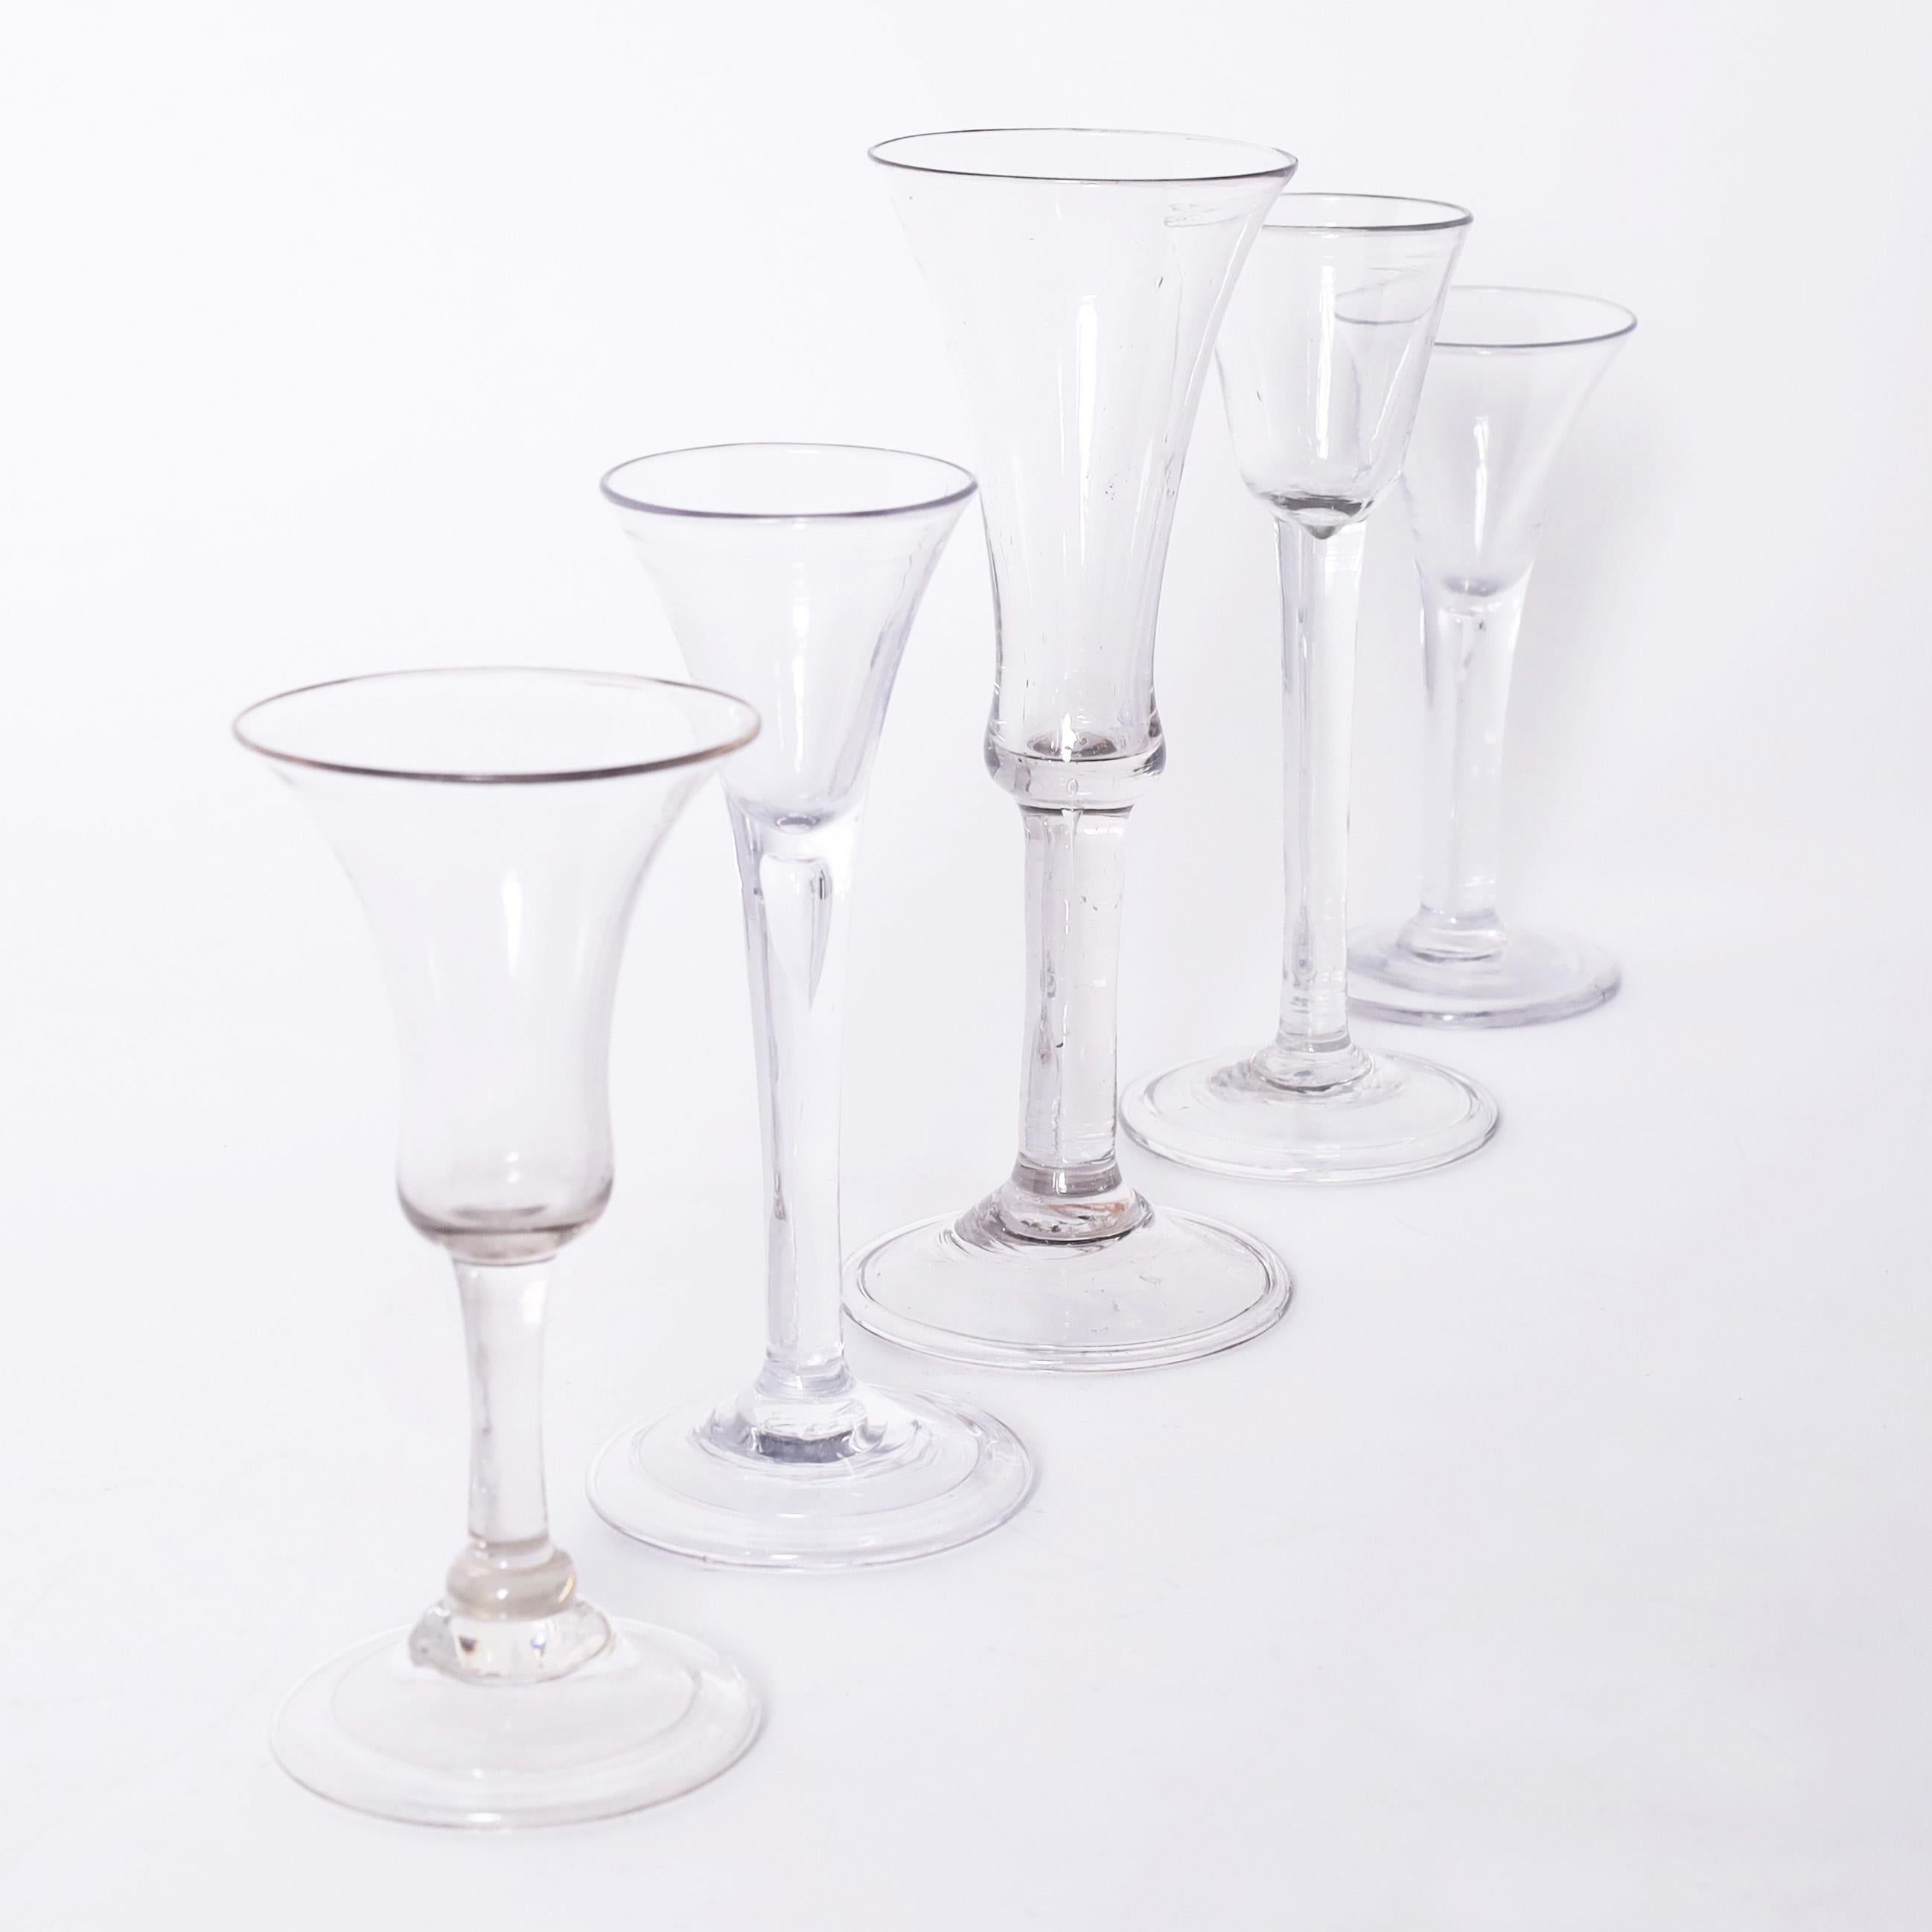 Rare and remarkable set of five hand blown folded and domed foot plain stem wine or liquor glasses in assorted sizes and classic elegant forms.

From left to right:

H: 5 DM: 2.5
H: 6 DM: 2.5
H: 7.5 DM: 3
H: 6.5 DM: 2.5
H: 5.5 DM: 2.5